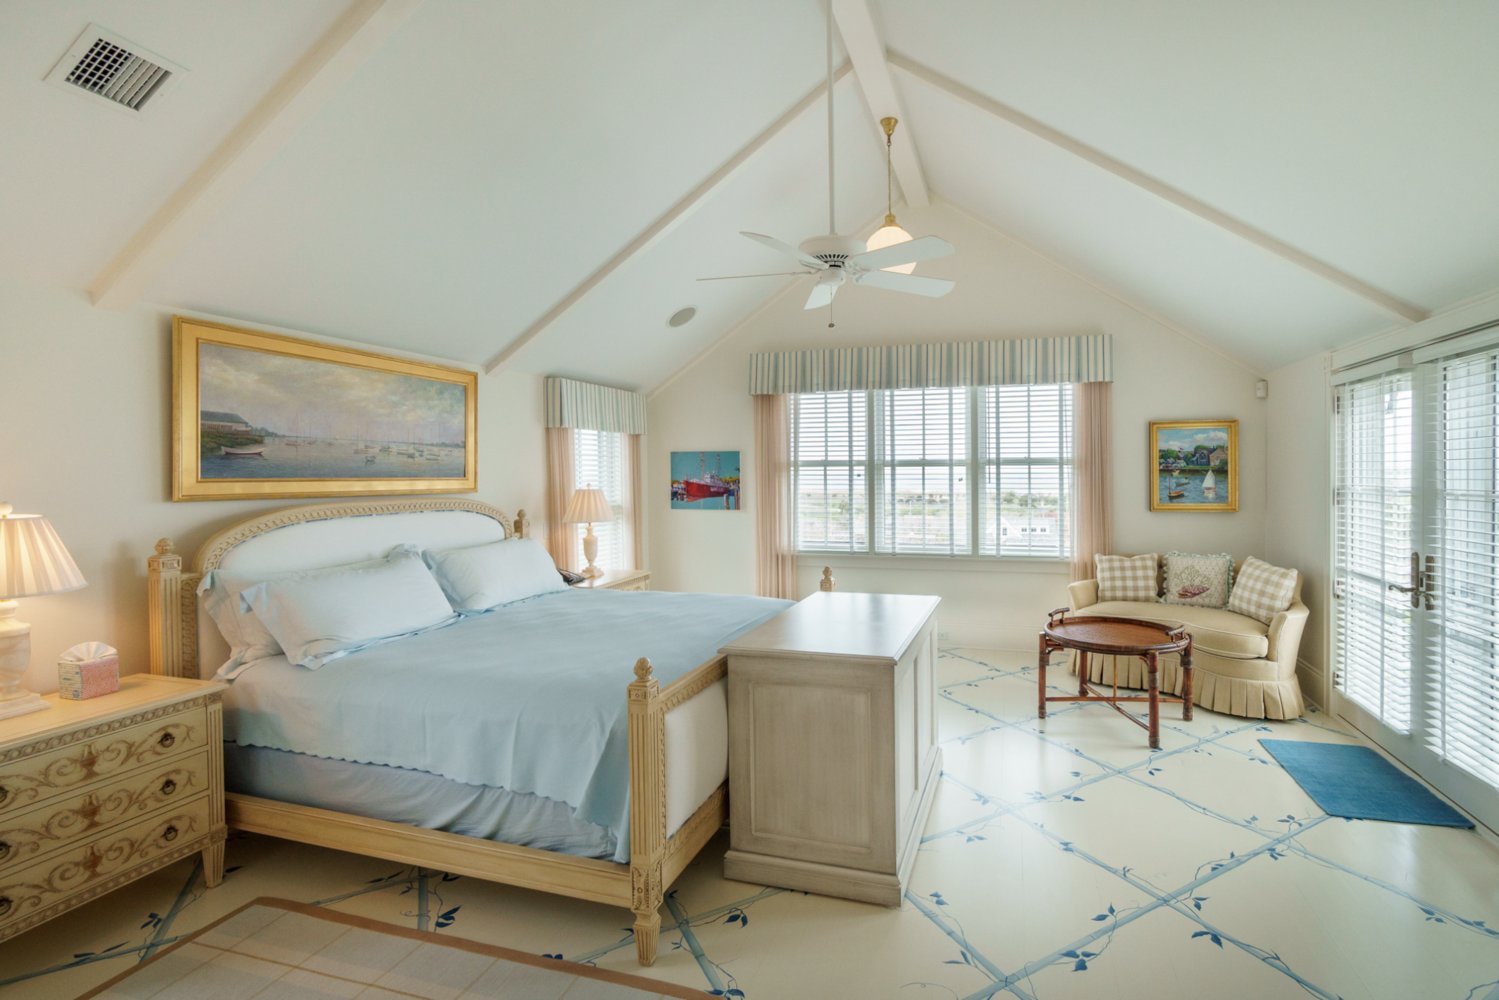 The primary en-suite bedroom has vaulted ceilings and a private deck.